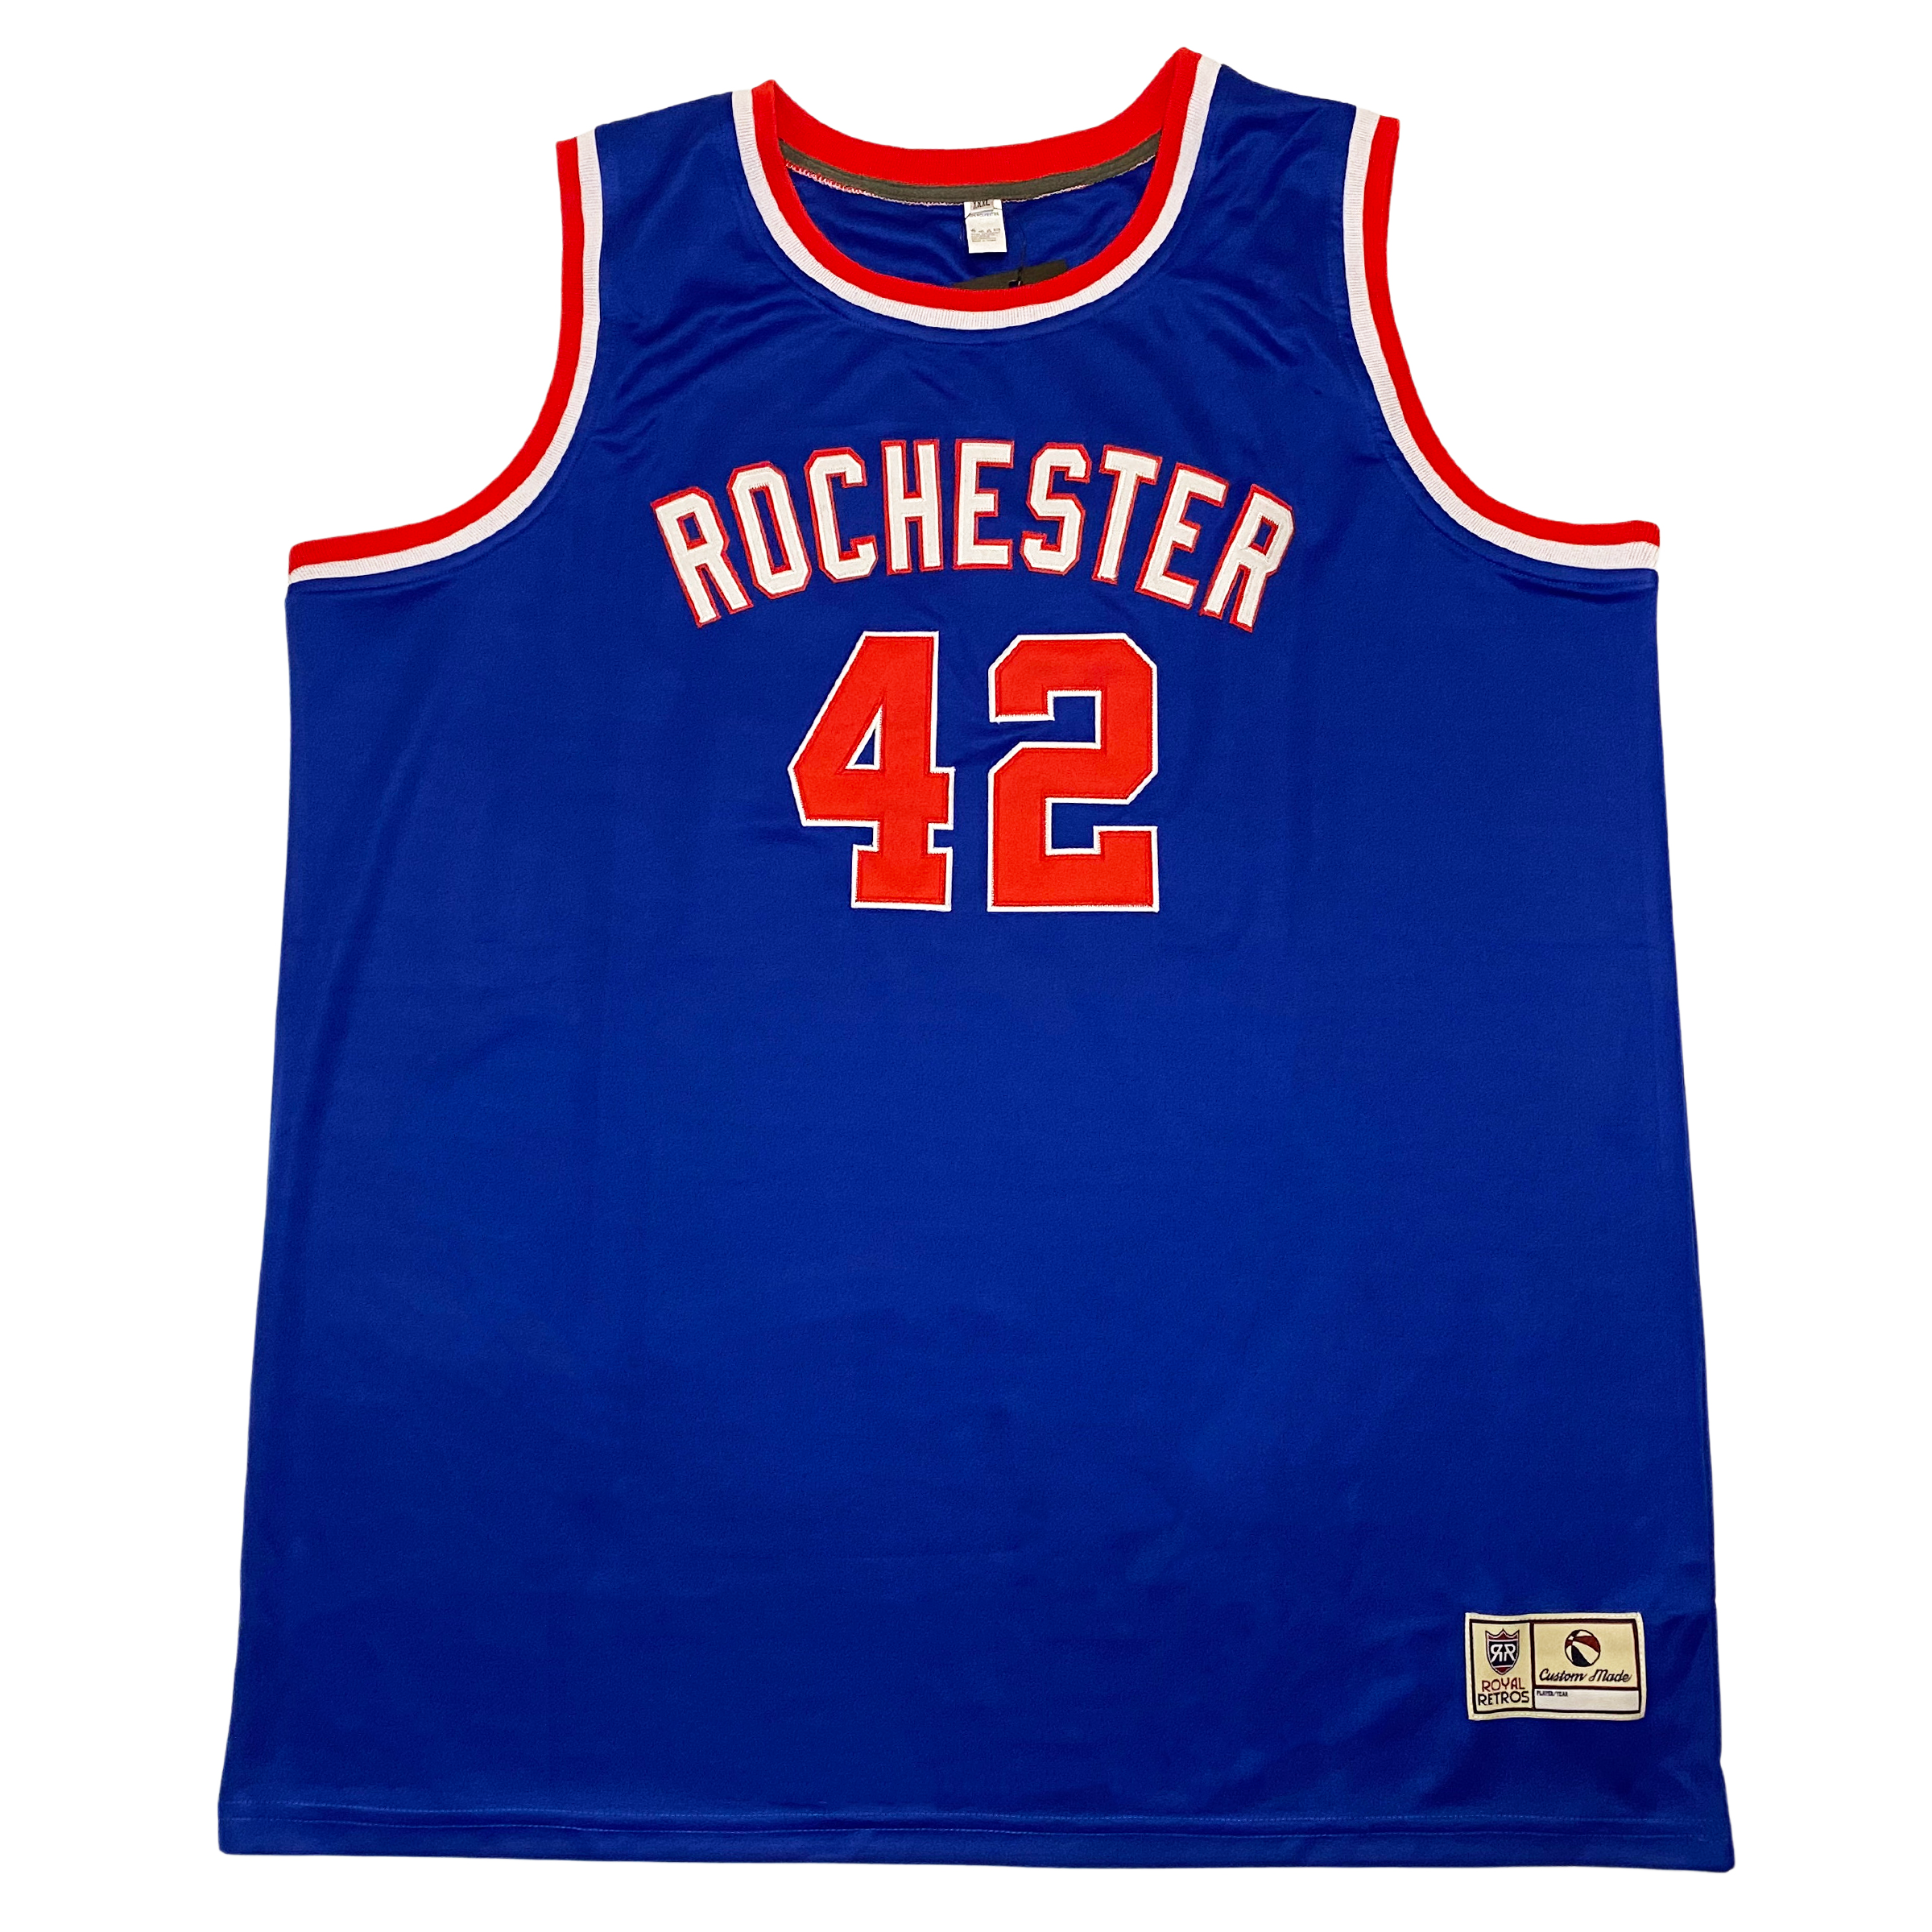 Rochester Royals Basketball Apparel Store